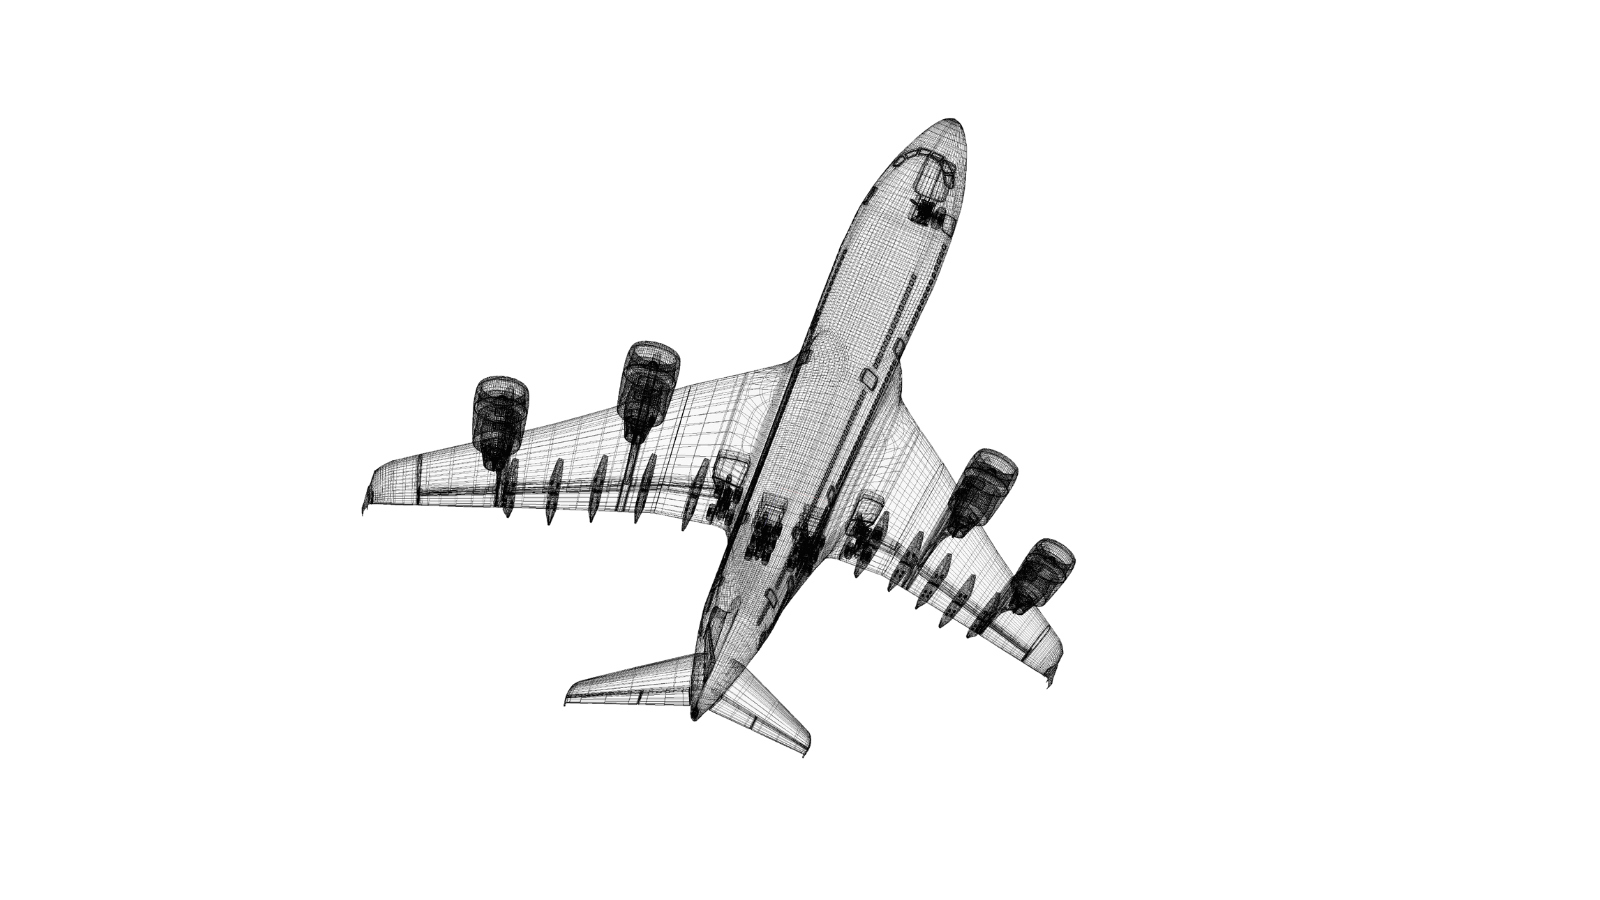 Transparent wireframe model of an airplane from a bottom-up perspective, displayed against a black background.